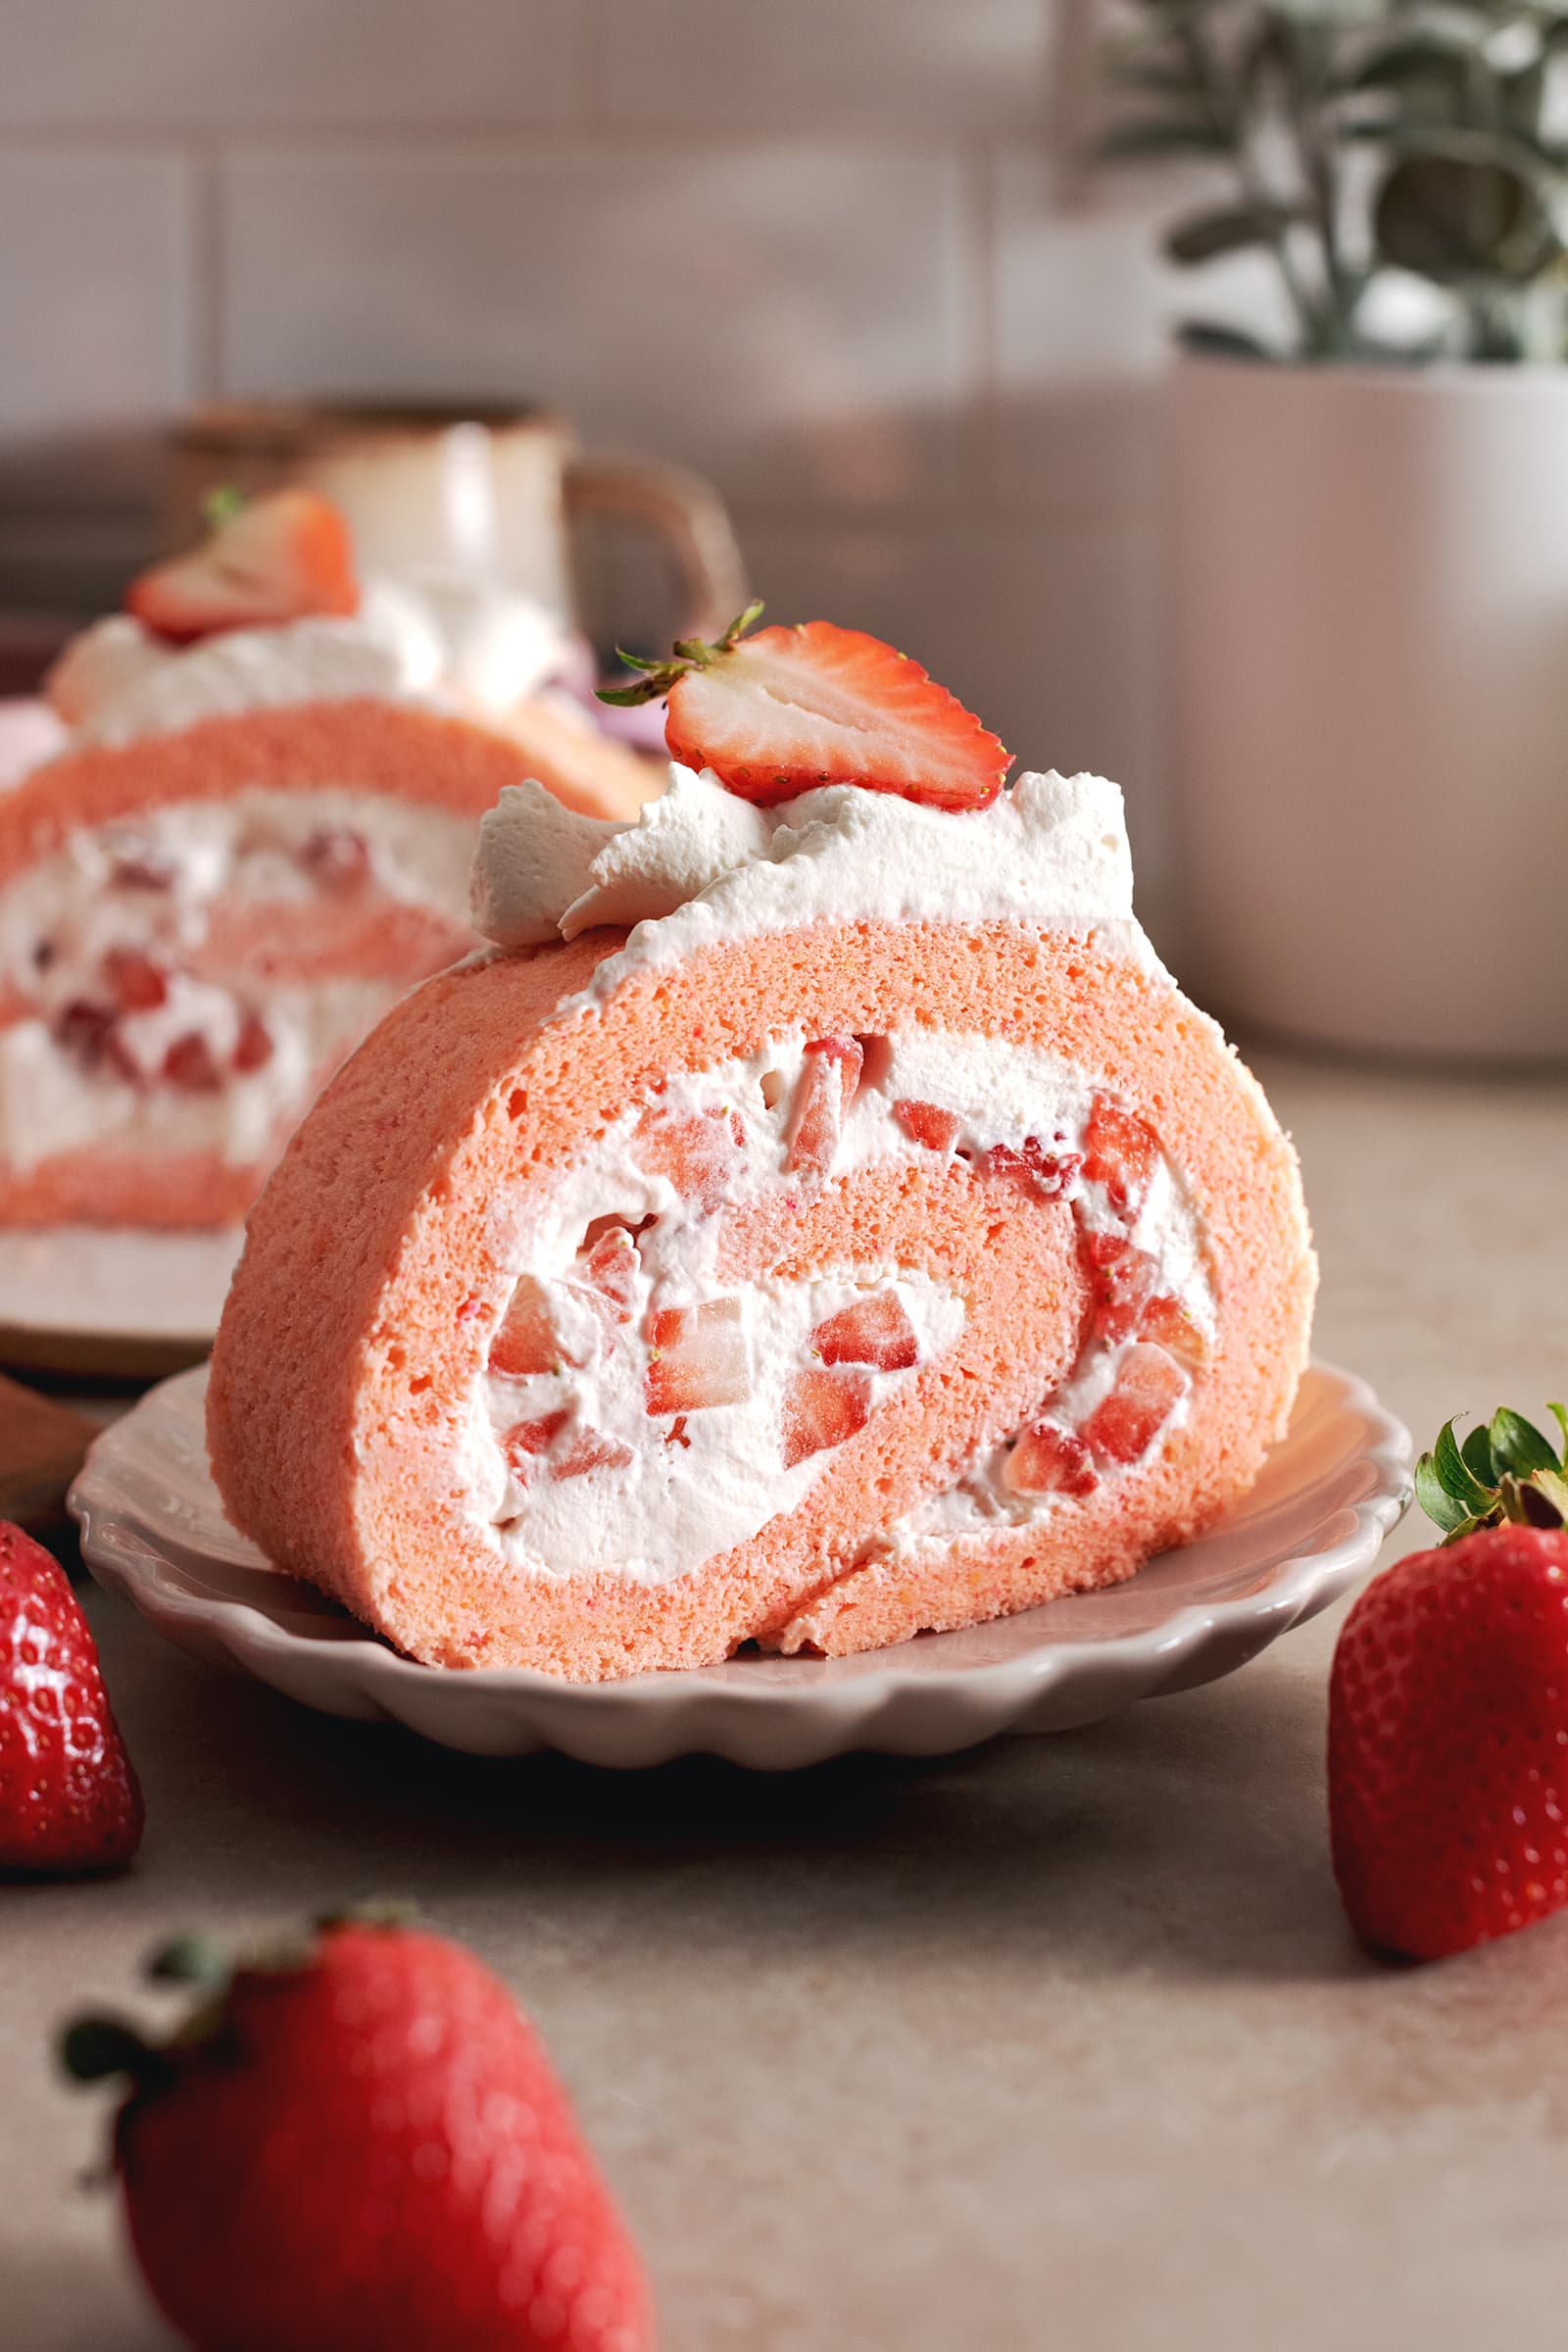 A slice of strawberry swiss roll cake rolled up with chunks of strawberries on a plate.